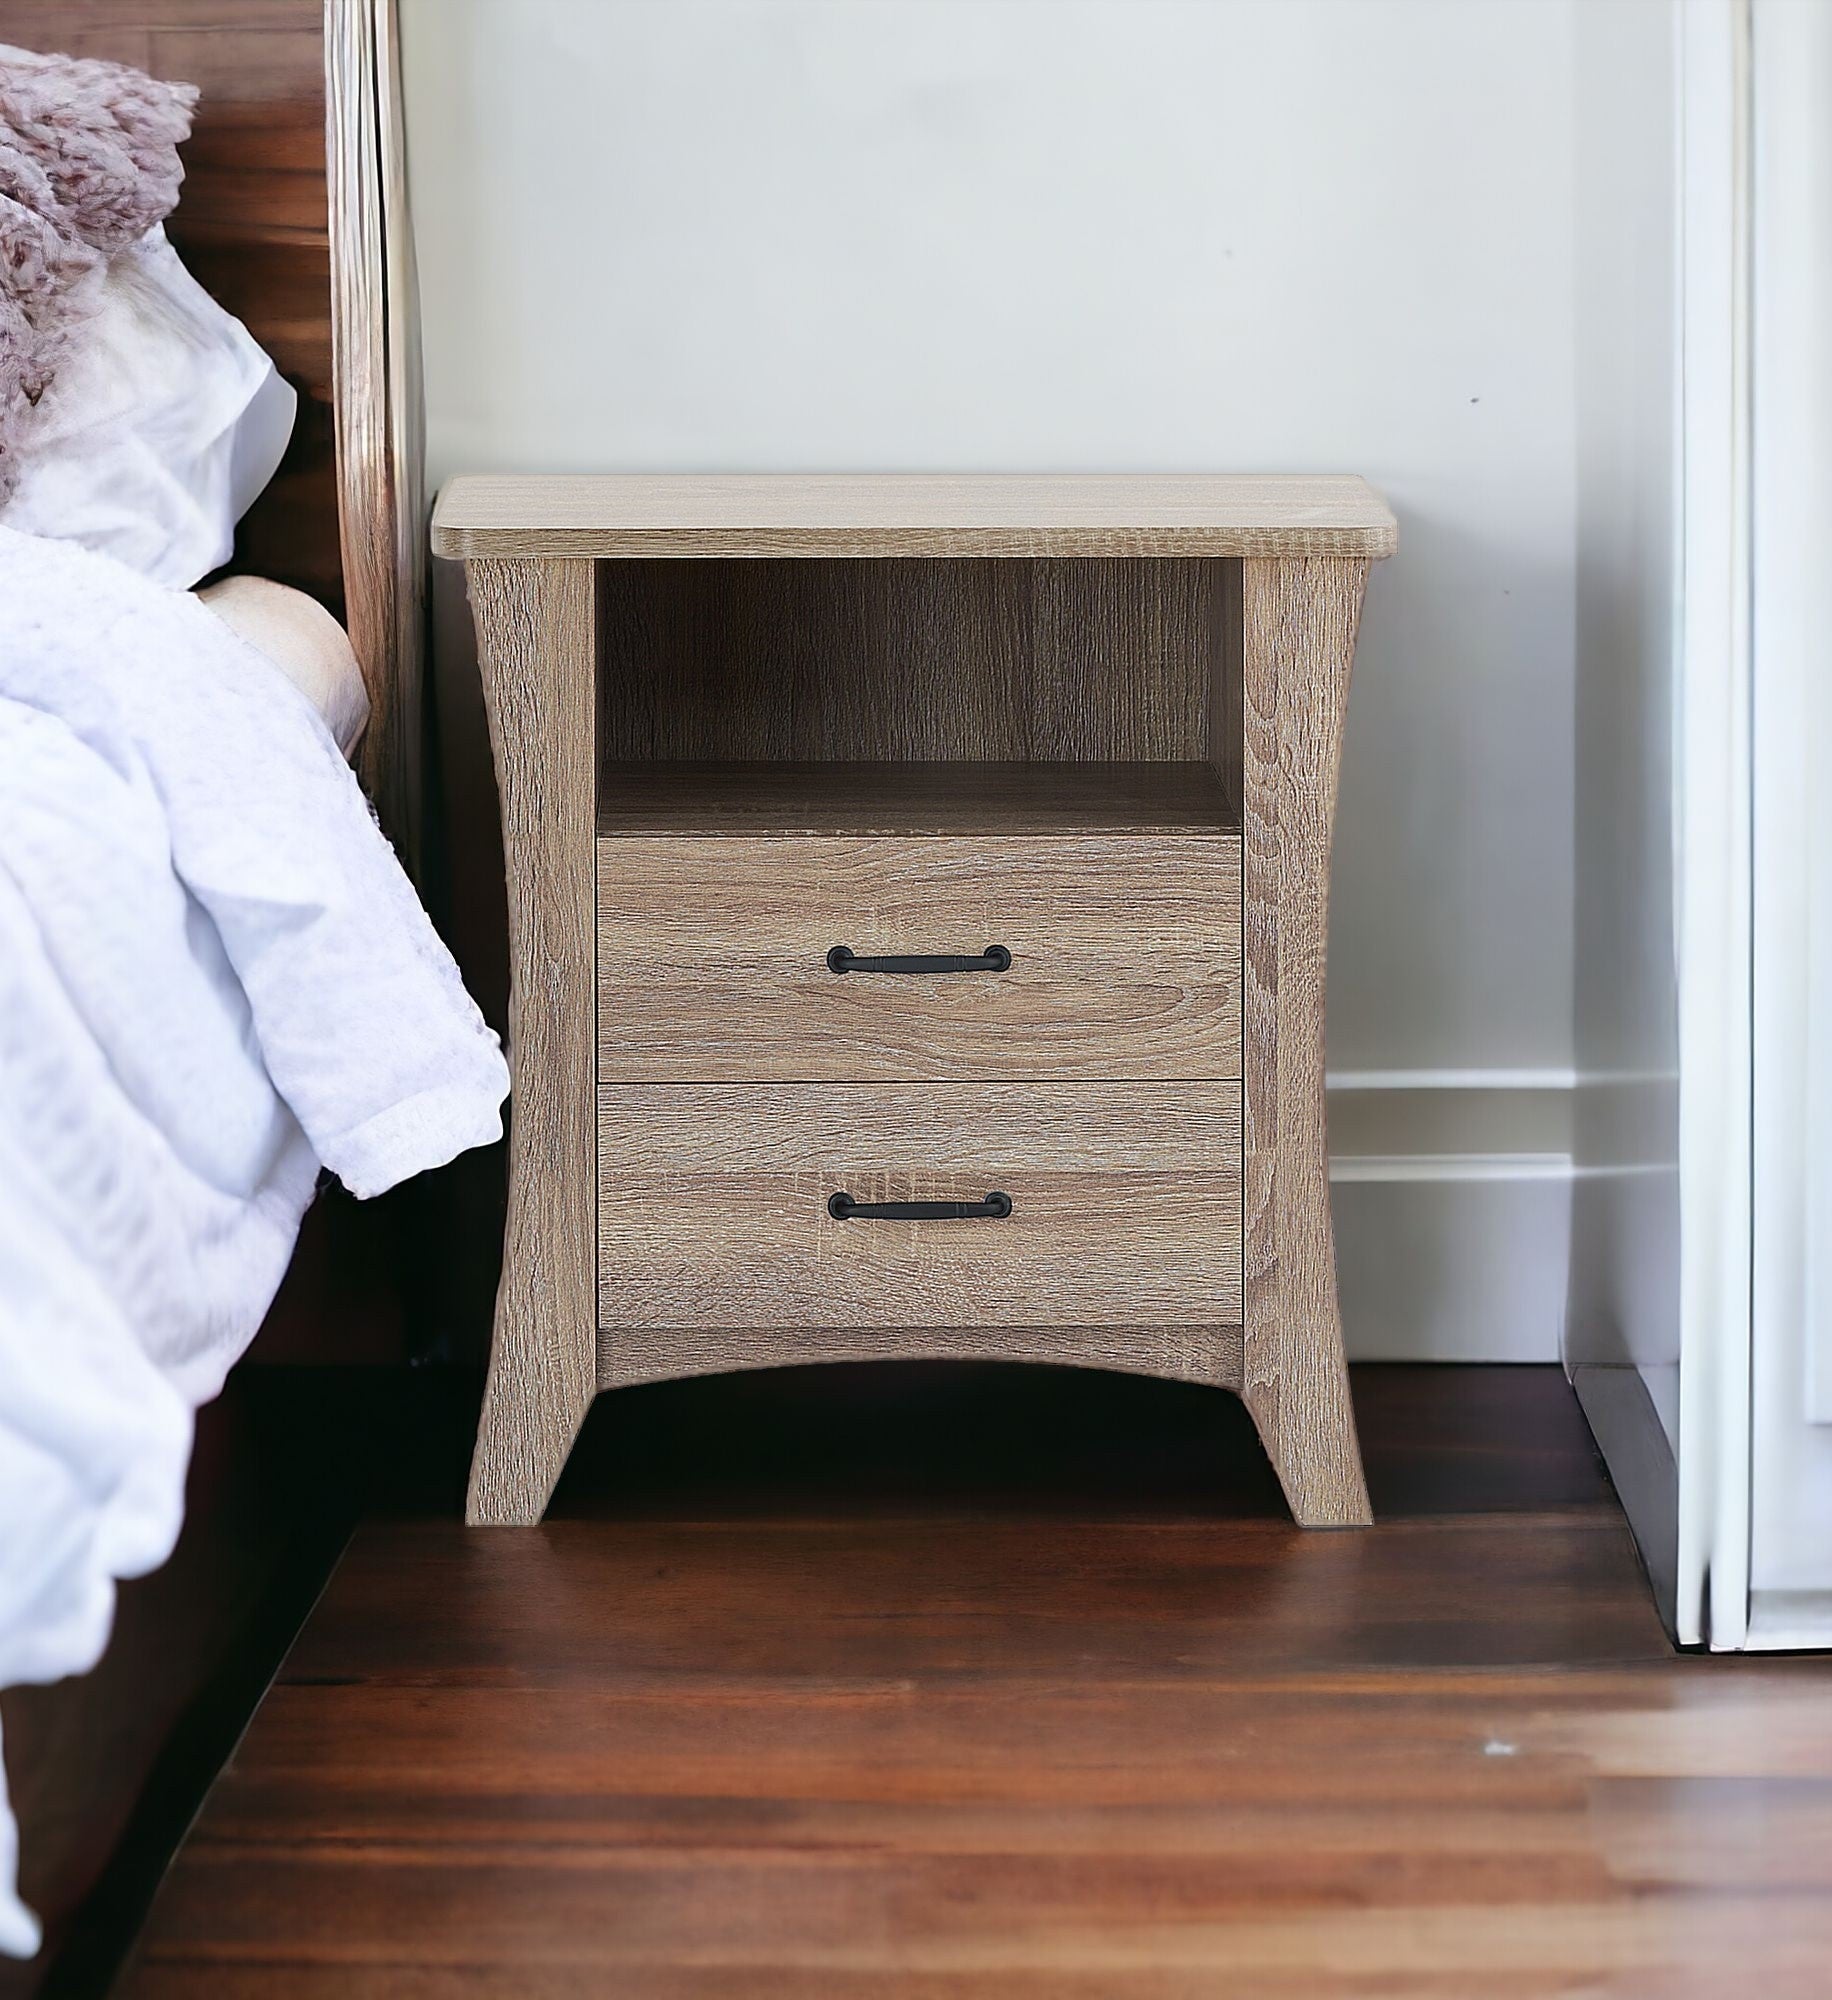 24" Brown Two Drawers Nightstand